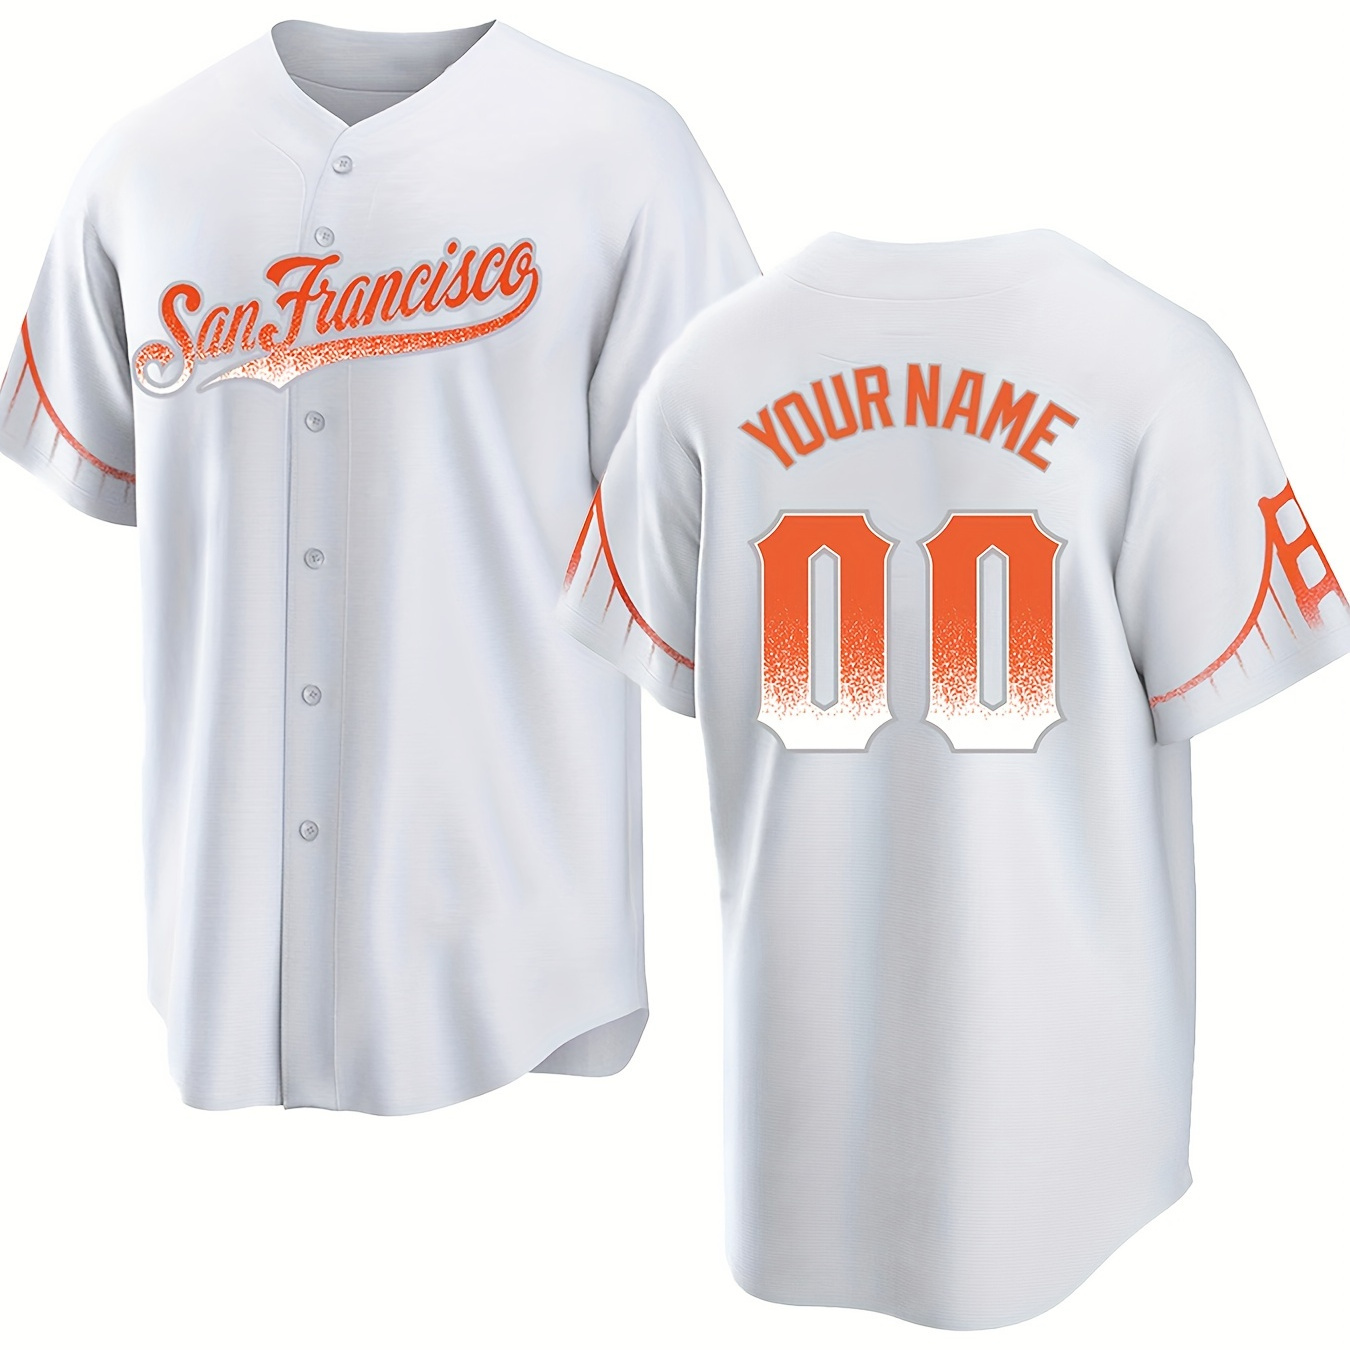 

San Francisco Print Men's Baseball Jersey V Neck T-shirt, With Customizable Name And Number, Breathable Sports Uniform For Training Competition